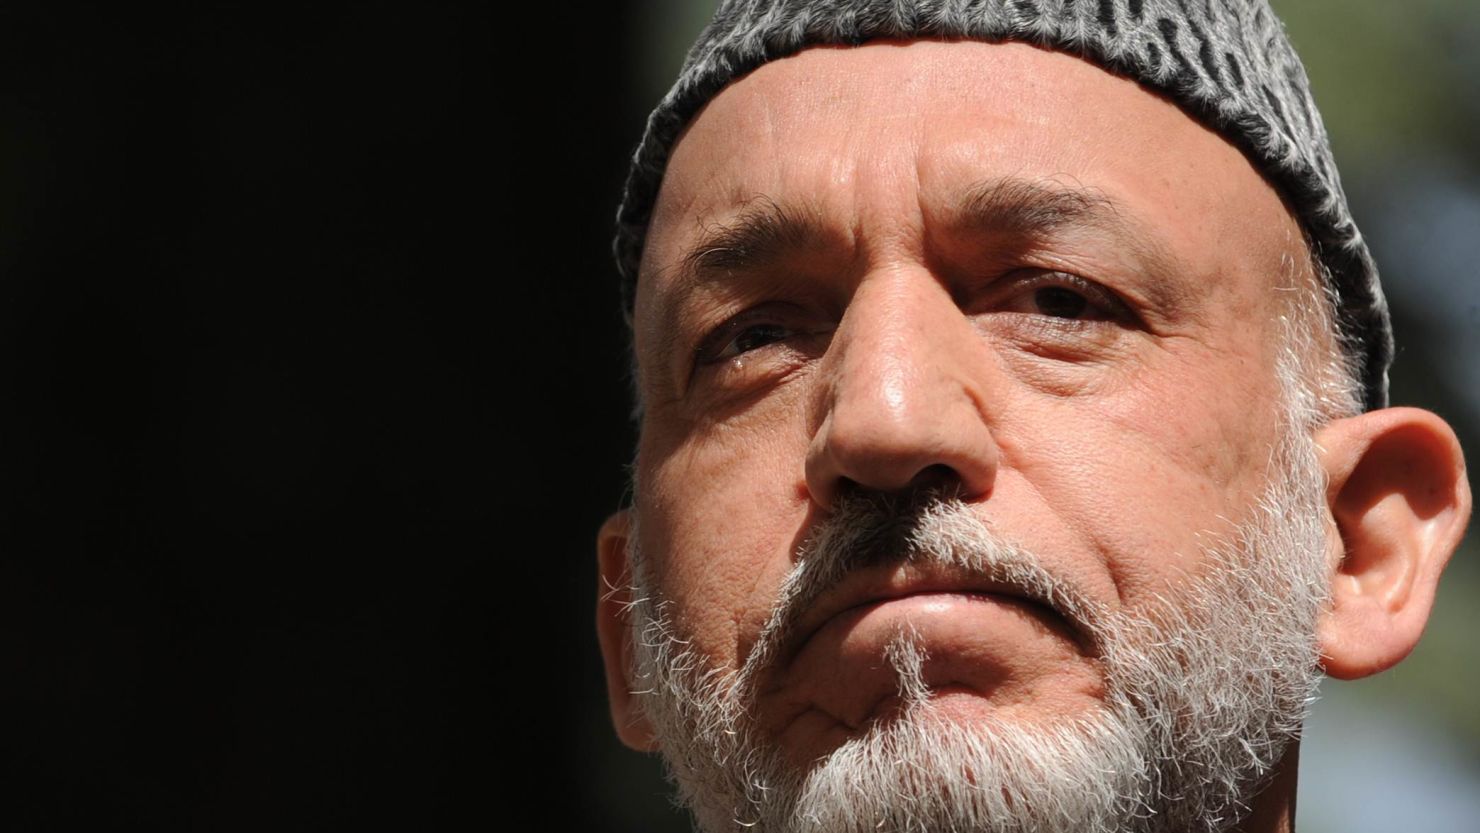 Afghan President Hamid Karzai says any peace negotiations with the Taliban must be conducted with Pakistan.